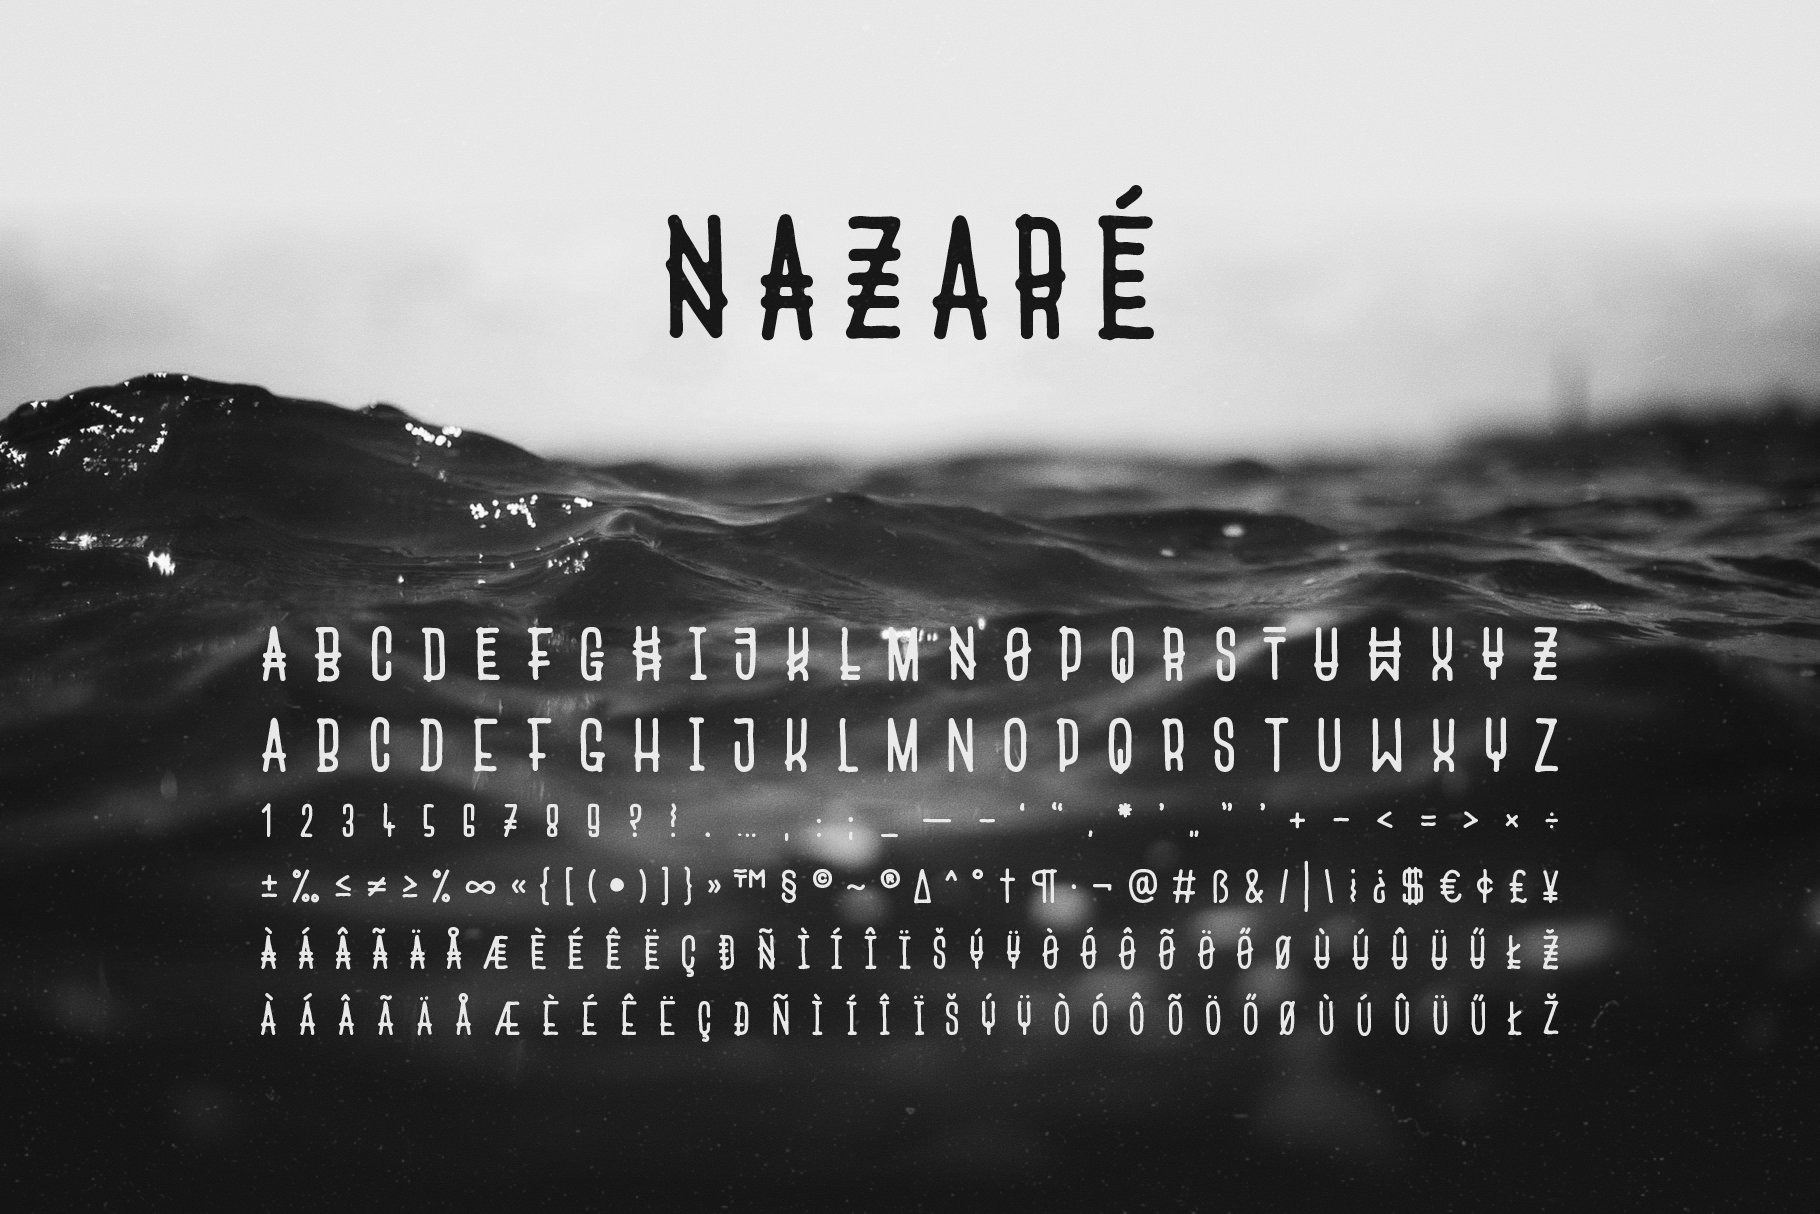 Nazare font cover image.